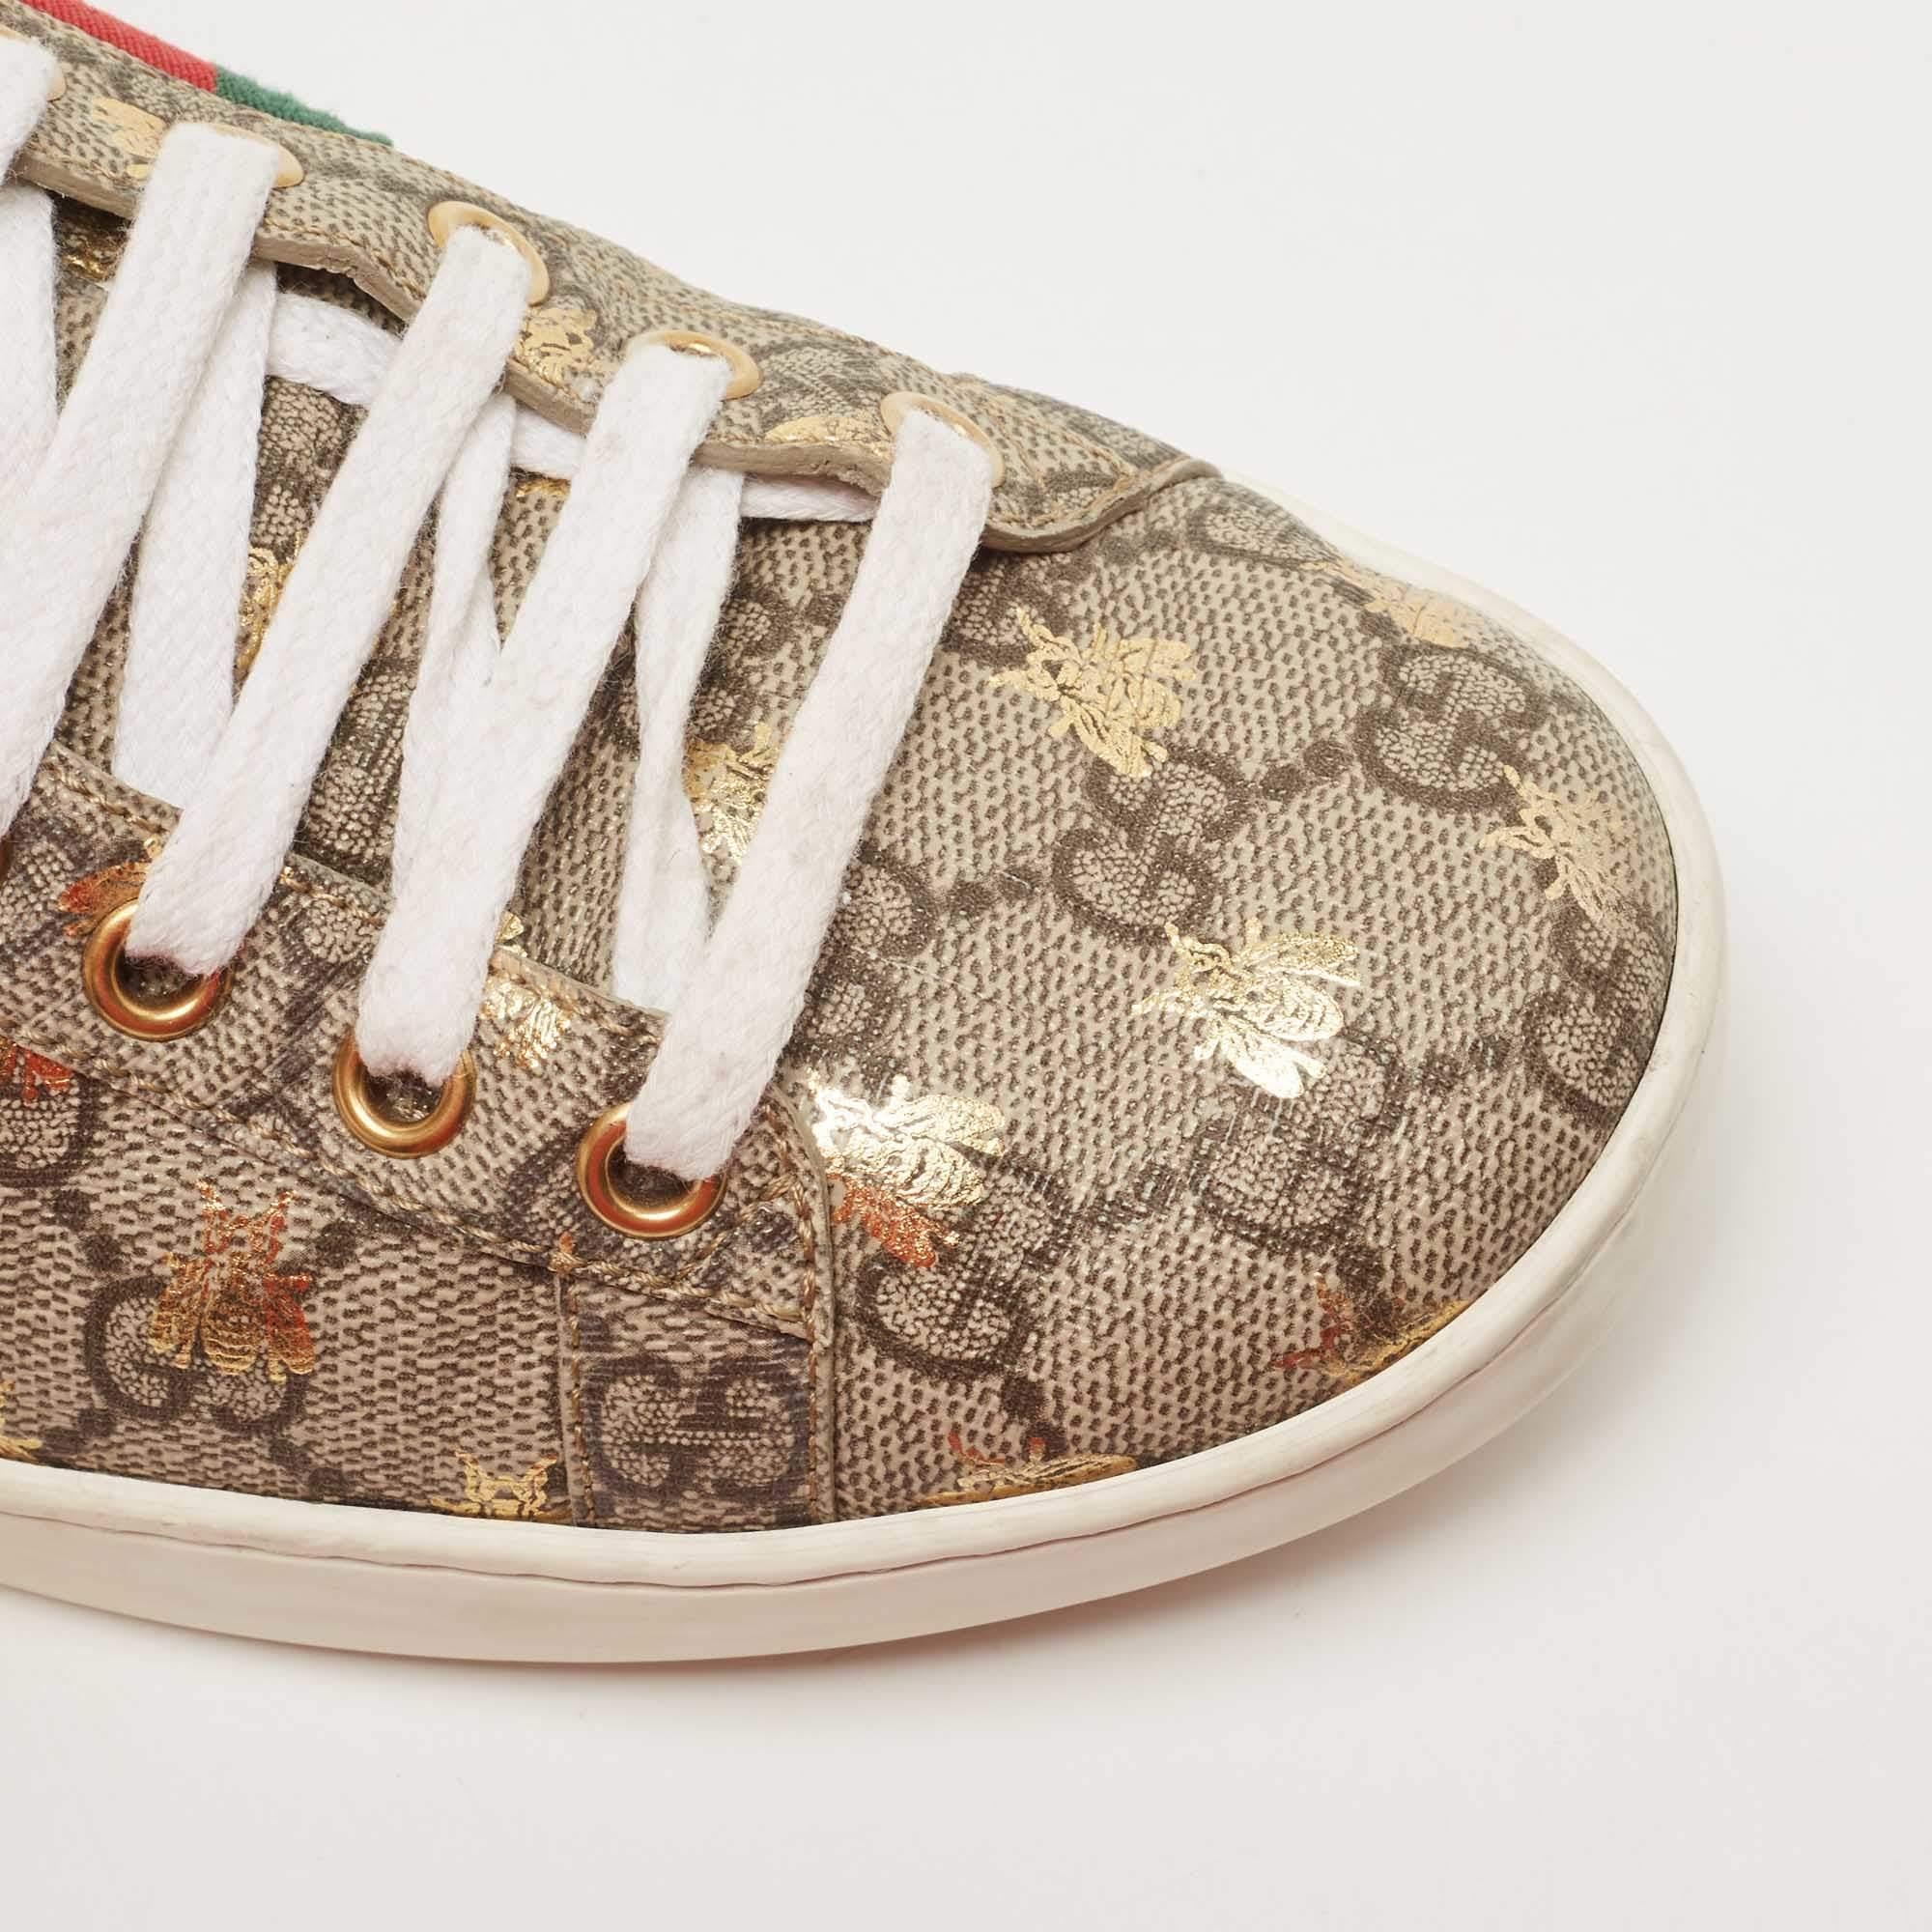 Gucci Brown/Beige GG Supreme Canvas Bee Print Ace Sneakers Size 38 2